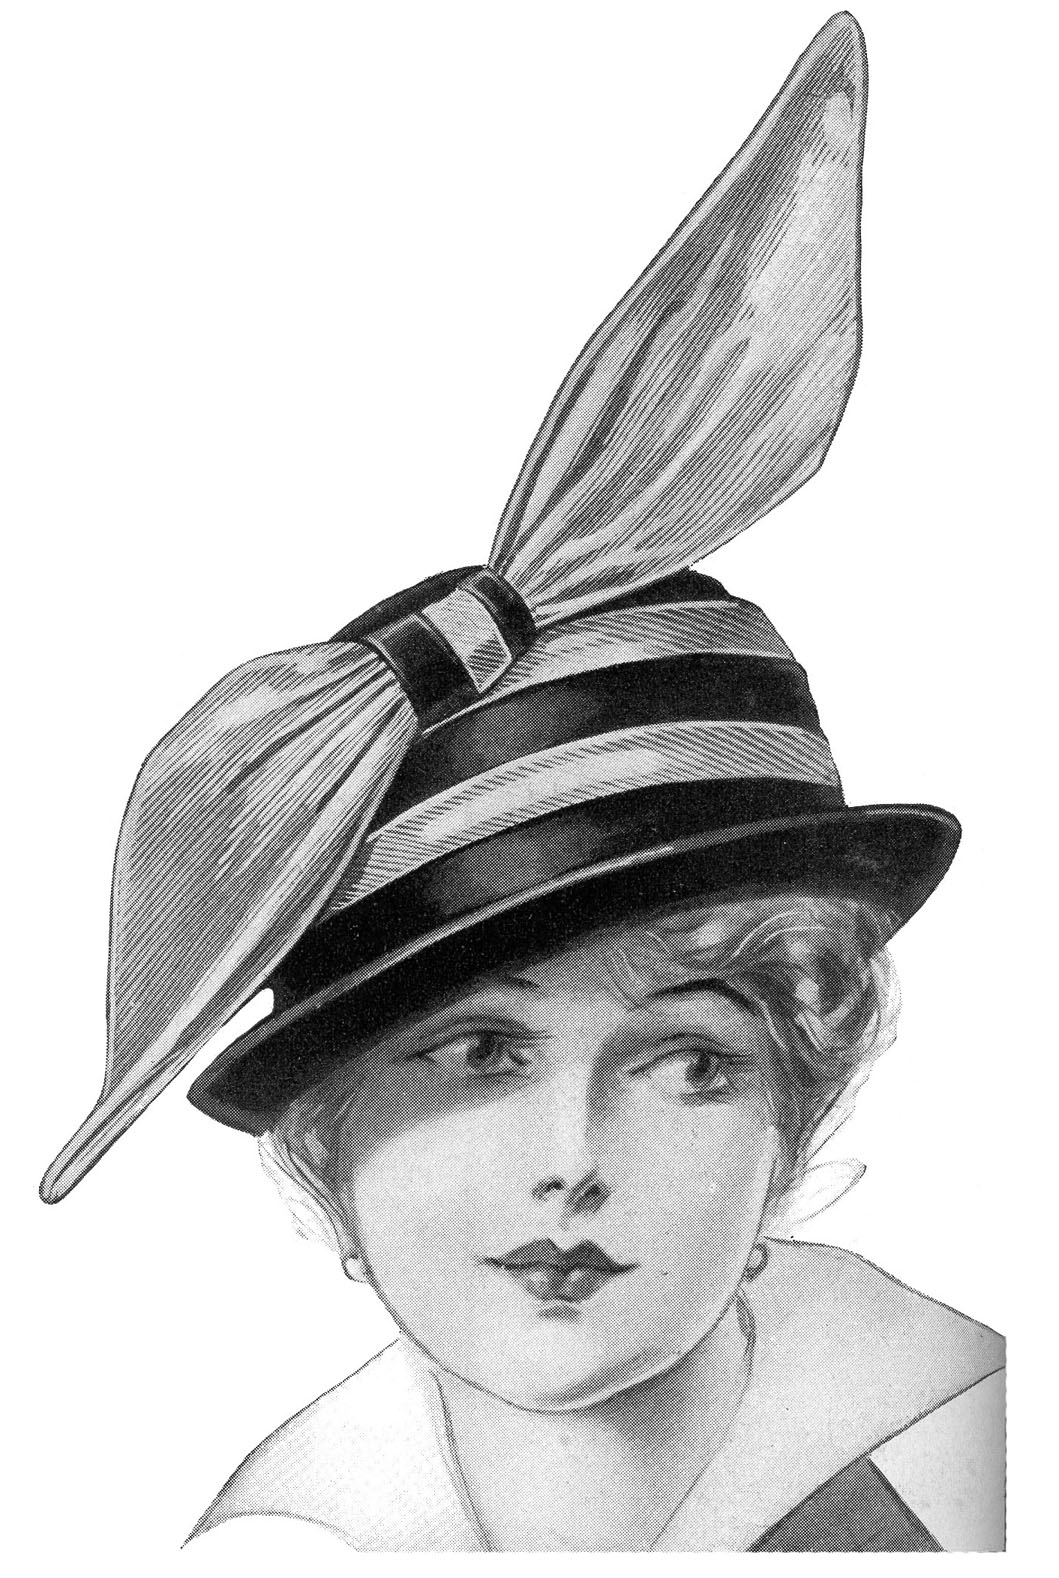 Ladies Hats From An Edwardian Fashion Catalog   The Two On The Top